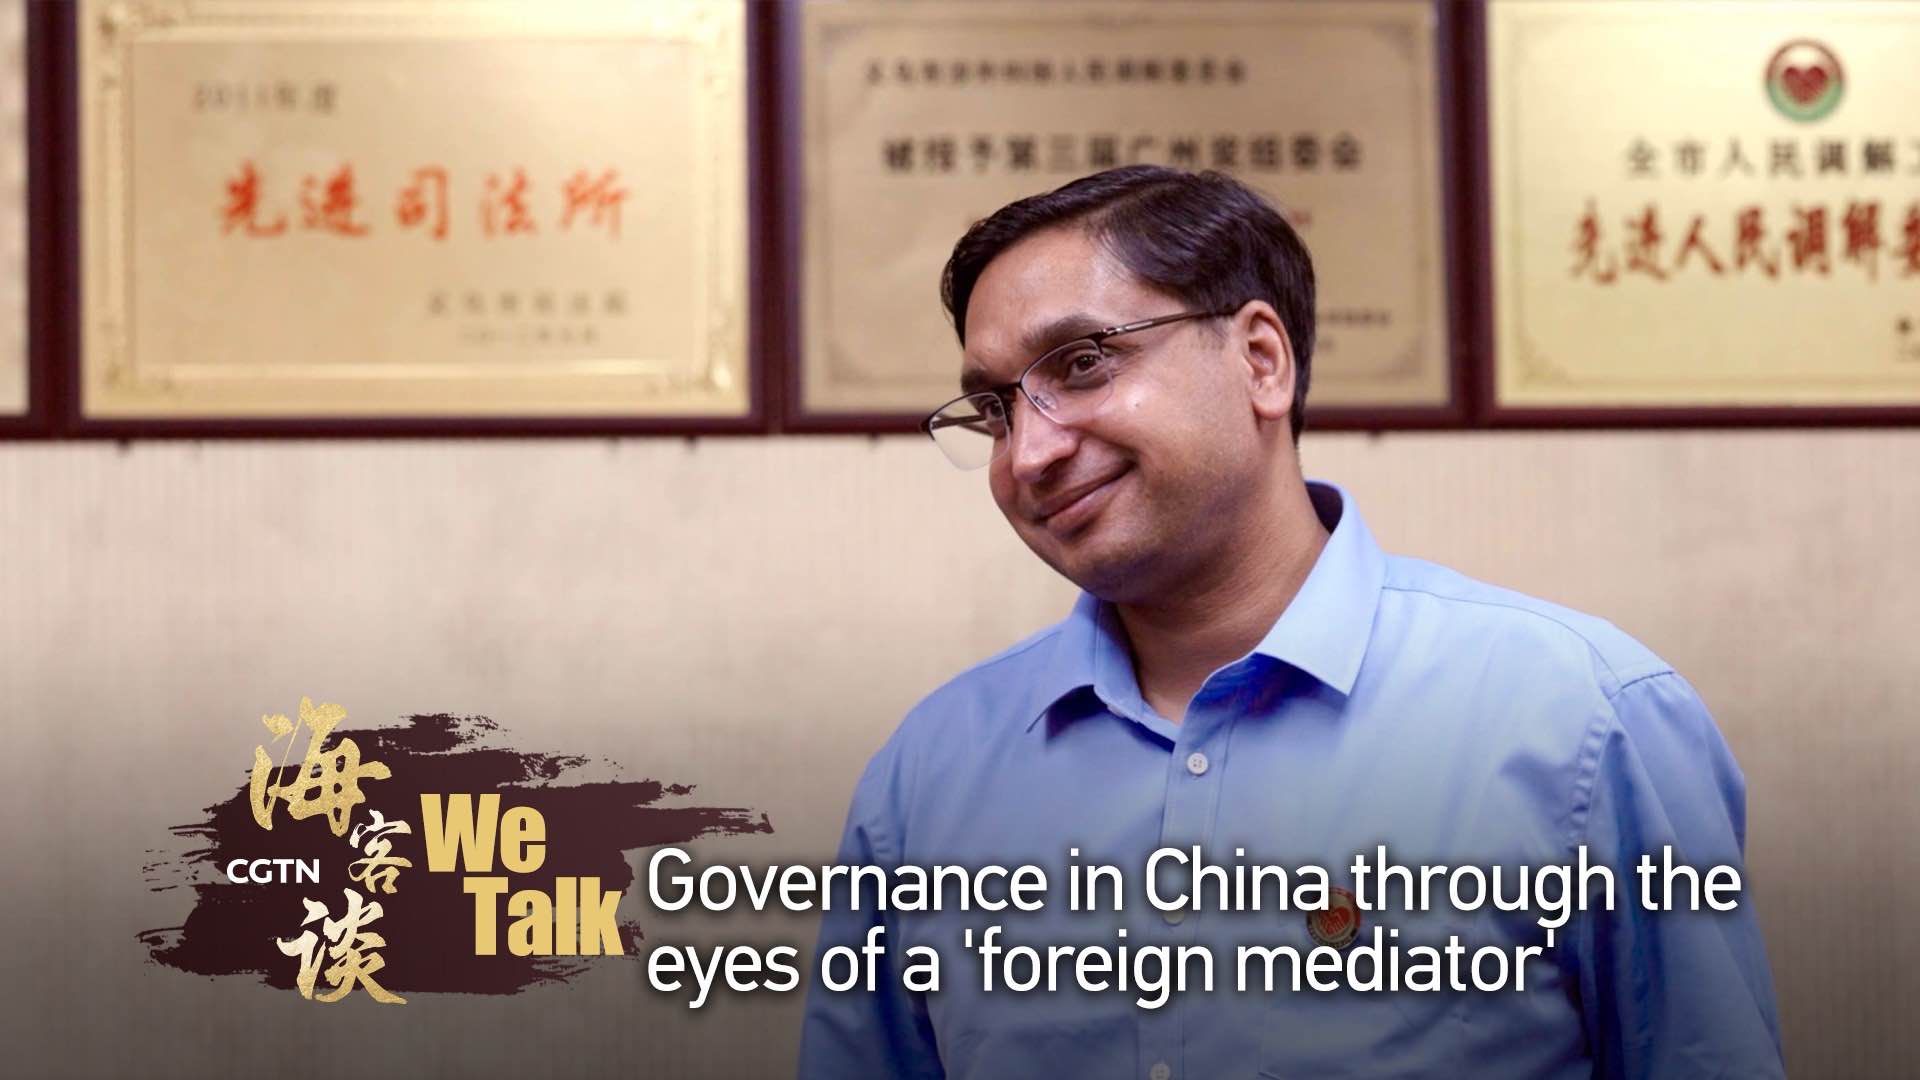 We Talk: Governance in China through the eyes of a 'foreign mediator'